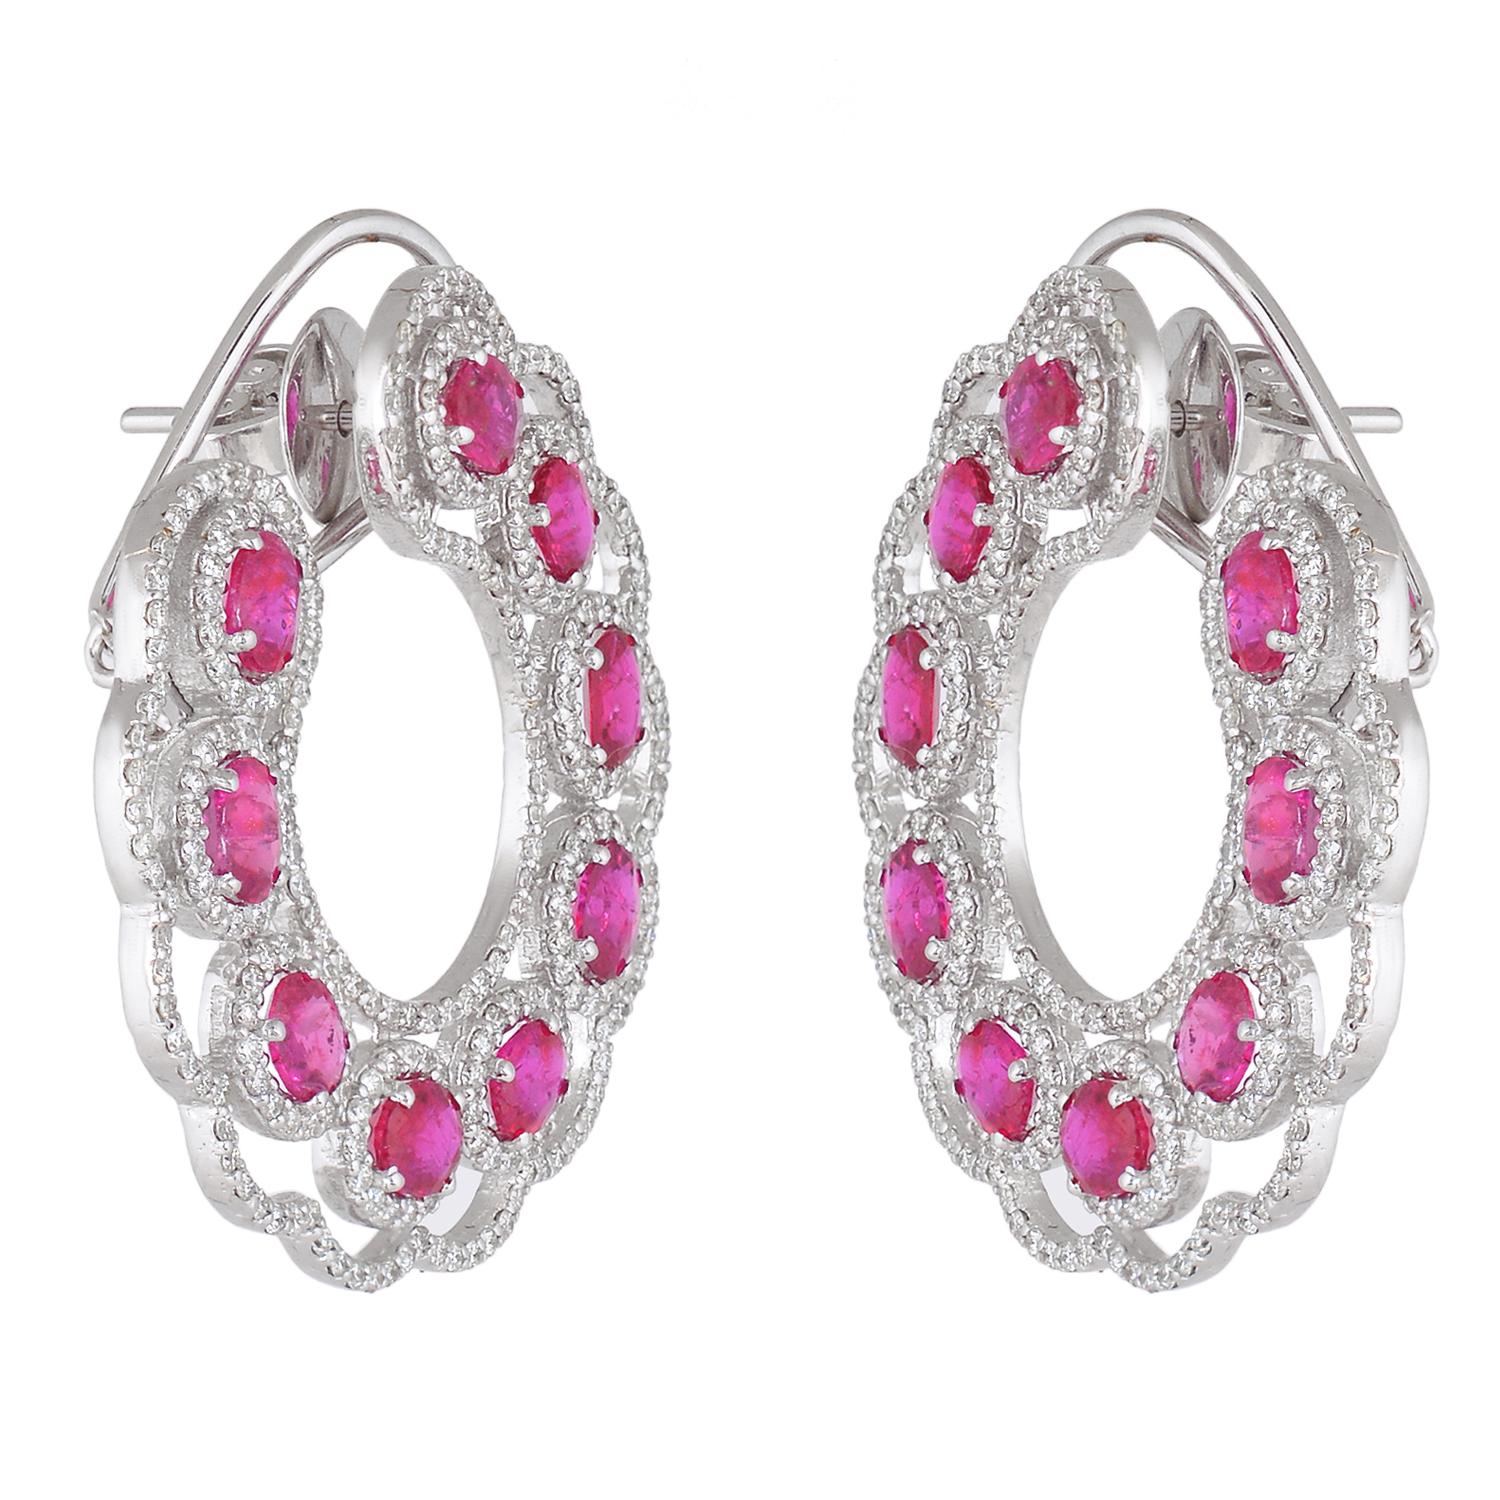 These earrings are made with 18k white gold and round diamonds. The earrings are designed with a hoop style. The diamonds are set in a prong setting. The earrings have a total diamond weight of 1/2 ct.

Specifications

Dimensions: Length: 3.6 cm,